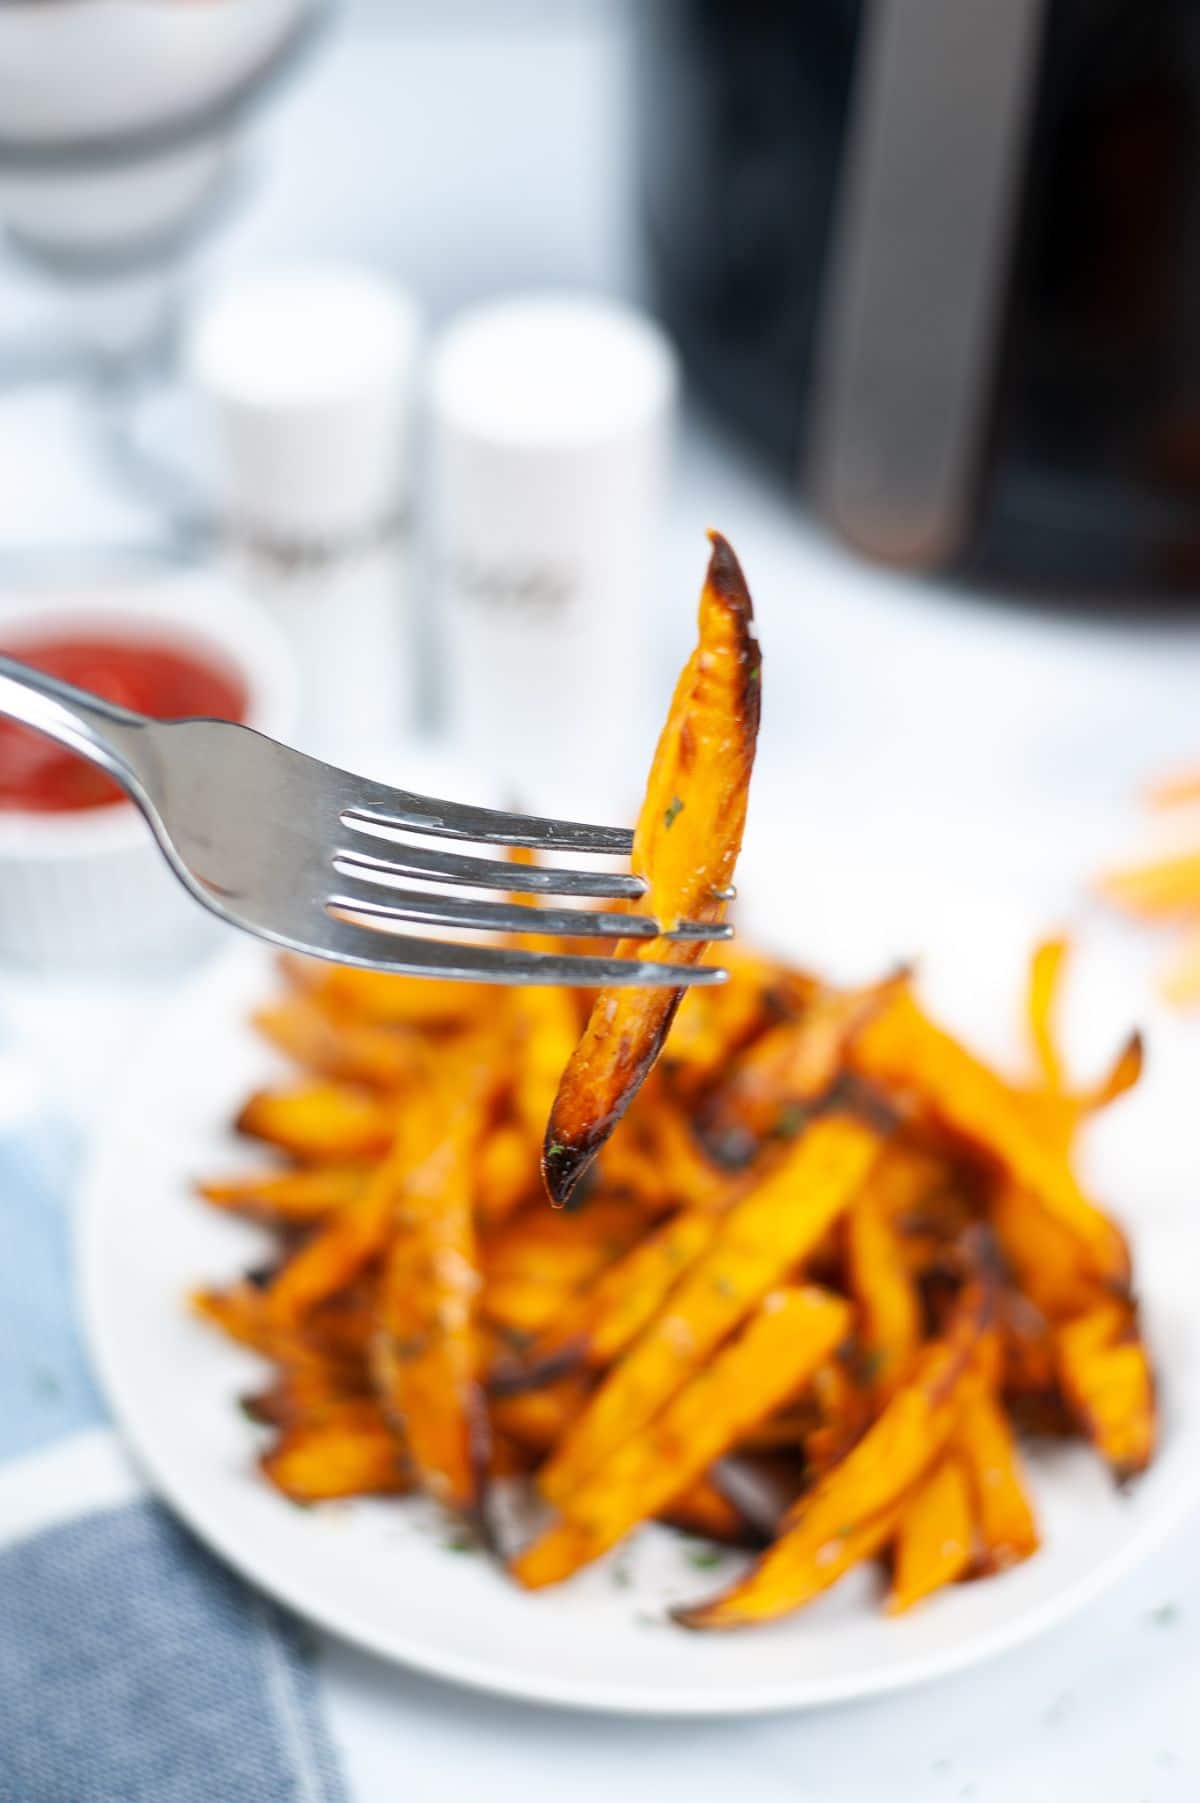 A sliced of Air Fryer Potato Fries picked using a fork, with the rest of the fries blurred at the background.